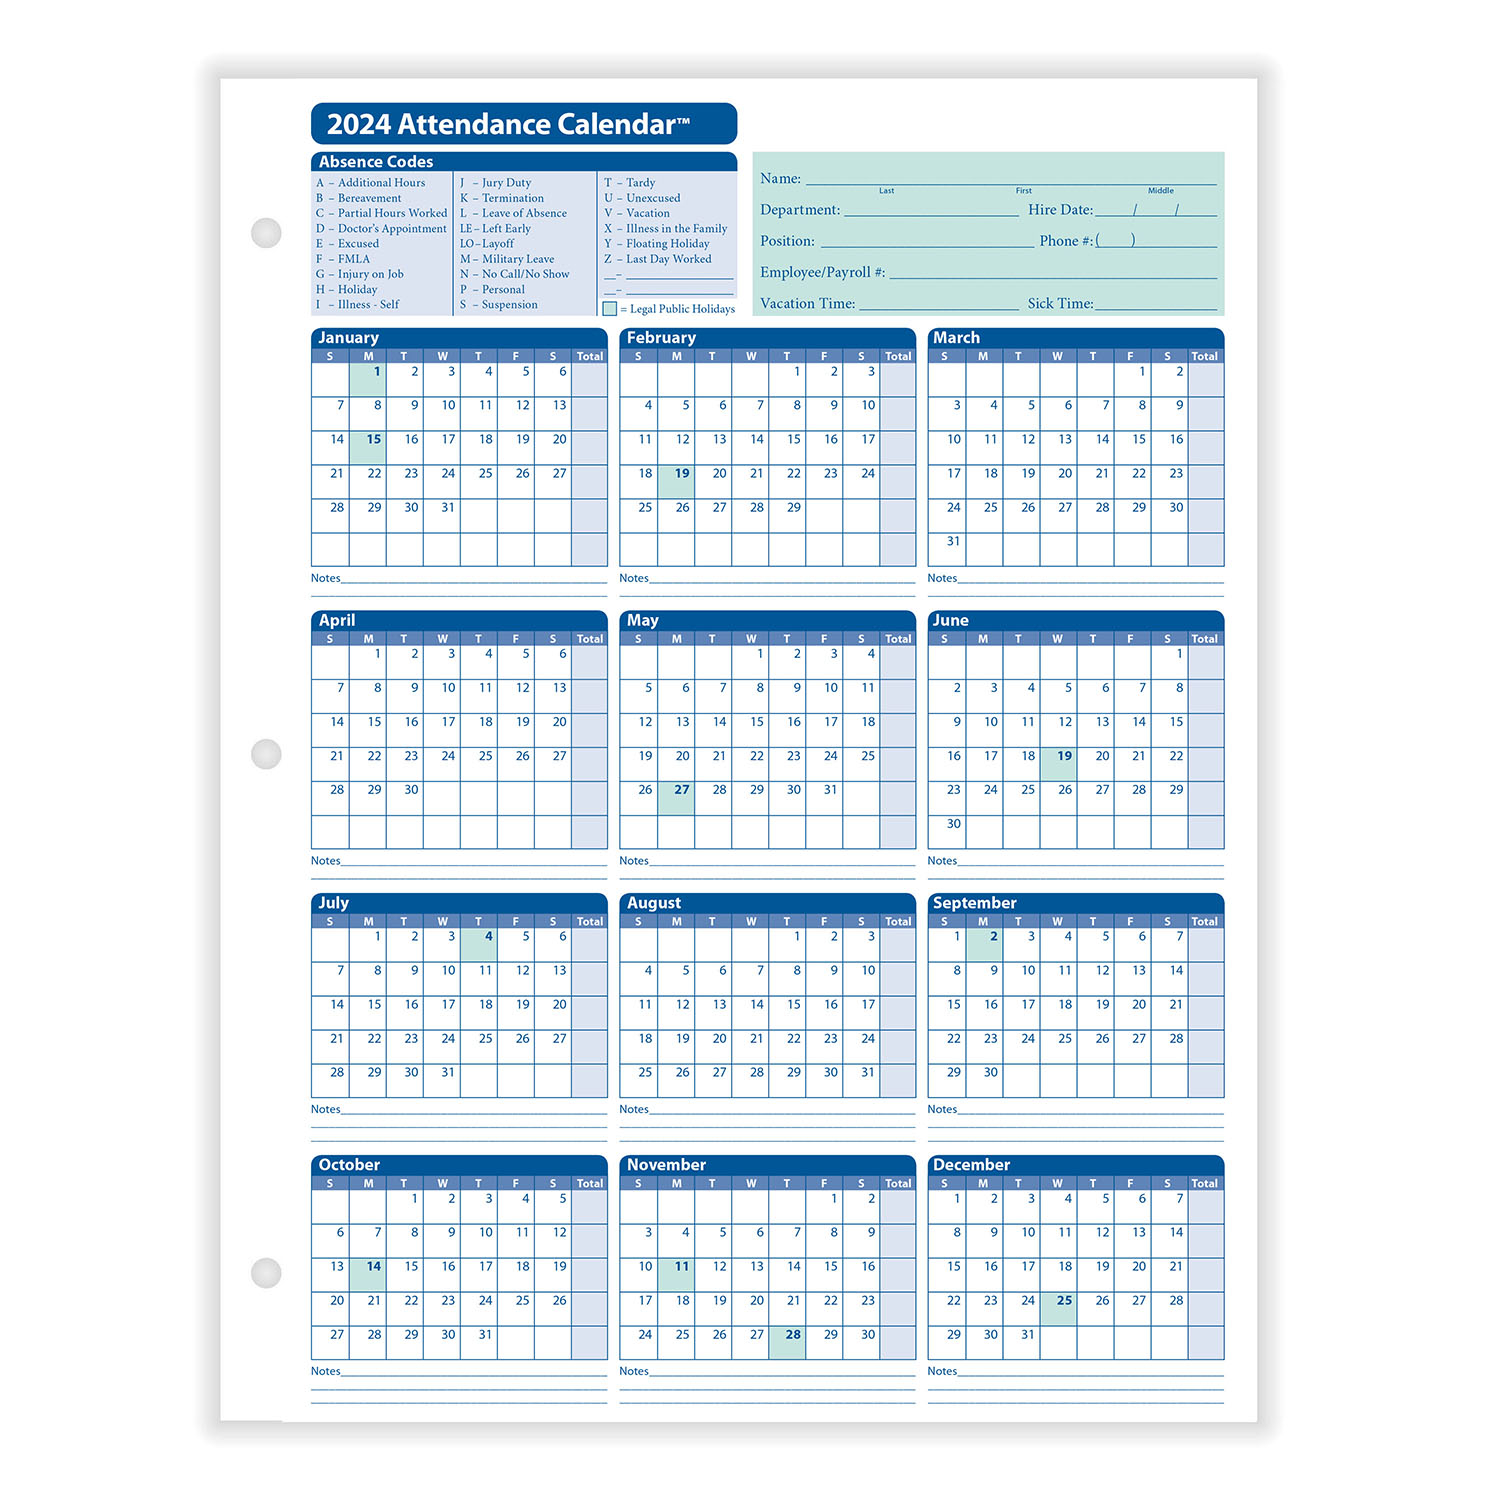 2024 Yearly Employee Attendance Calendar | Yearly Calendar | Hrdirect with regard to Attendance Tracking Calendar 2024